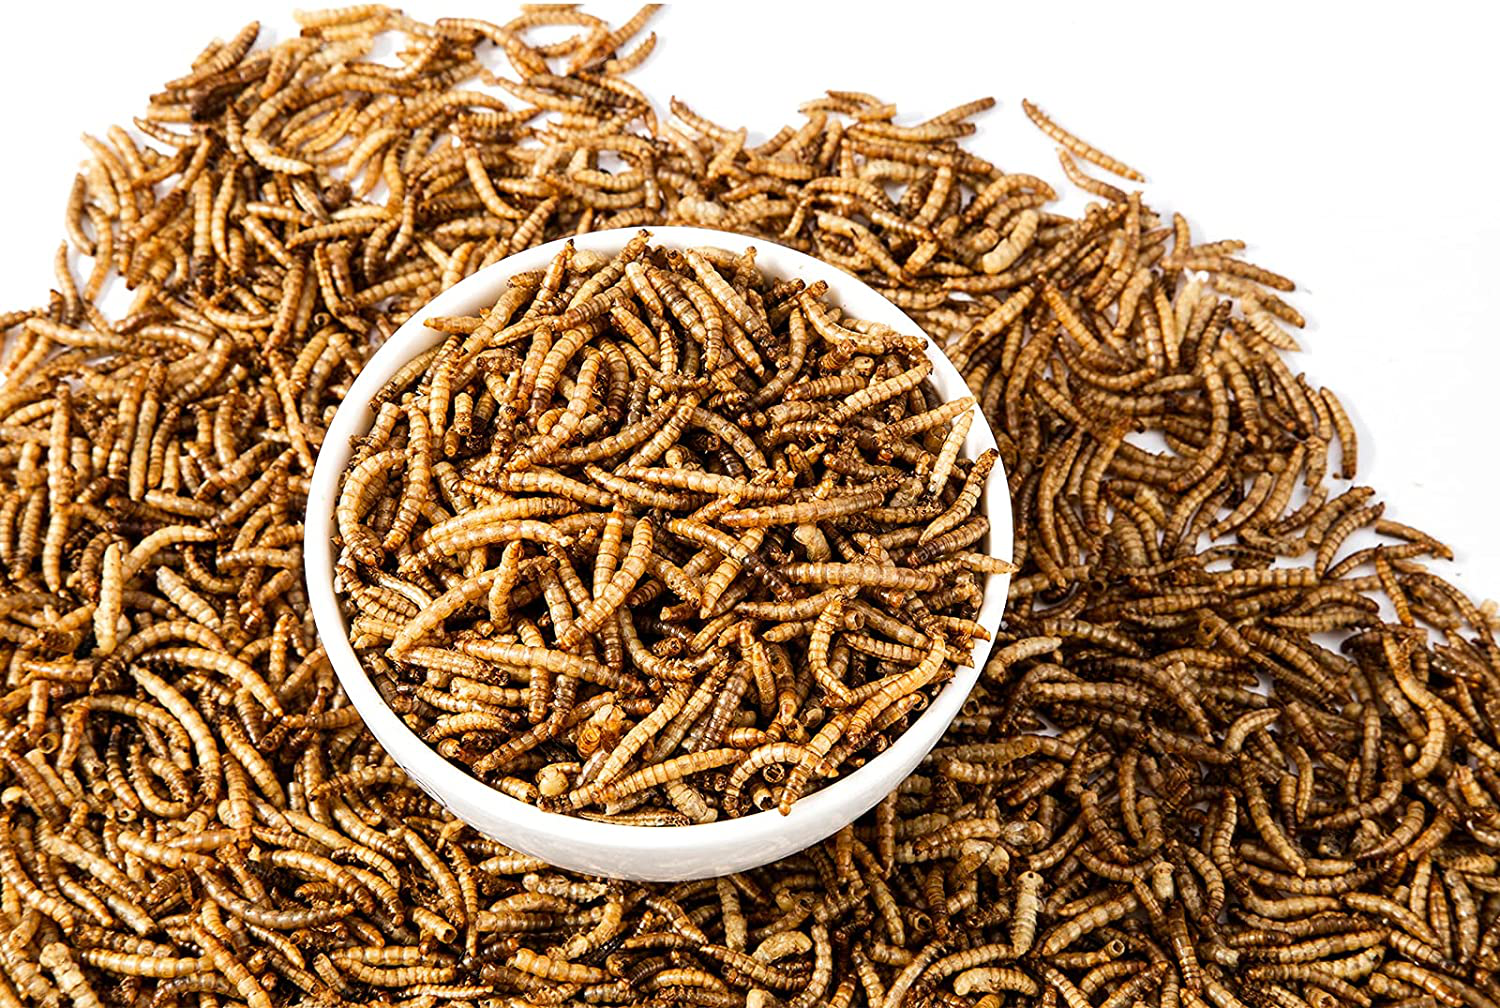 RANZ 5LB & 10LB Non-Gmo Dried Mealworms for Chicken Feed, High Protein Mealworm Treats, Best for Wild Birds, Ducks, Hens, Fish, Reptiles & Amphibian.